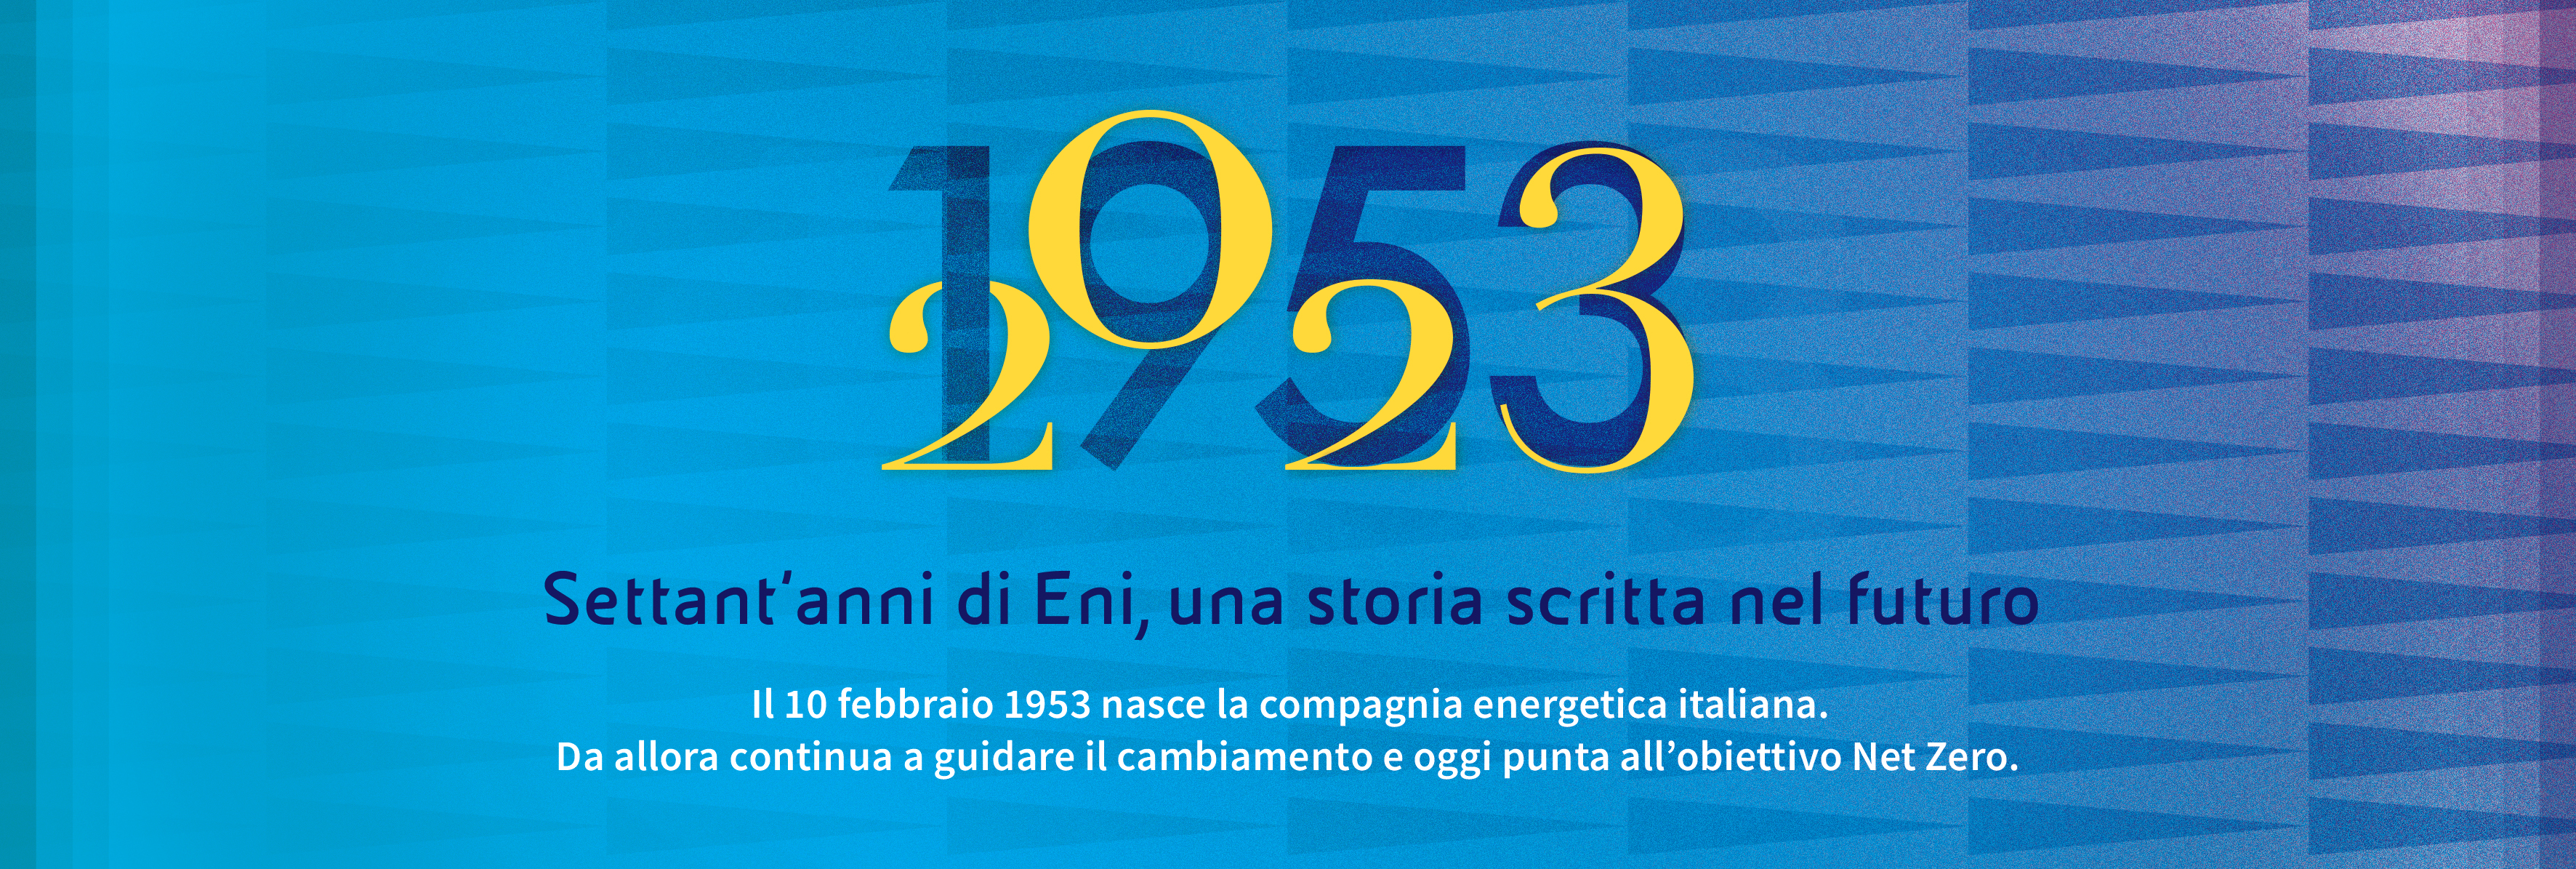 Eni_70Anni_cover-page.jpg